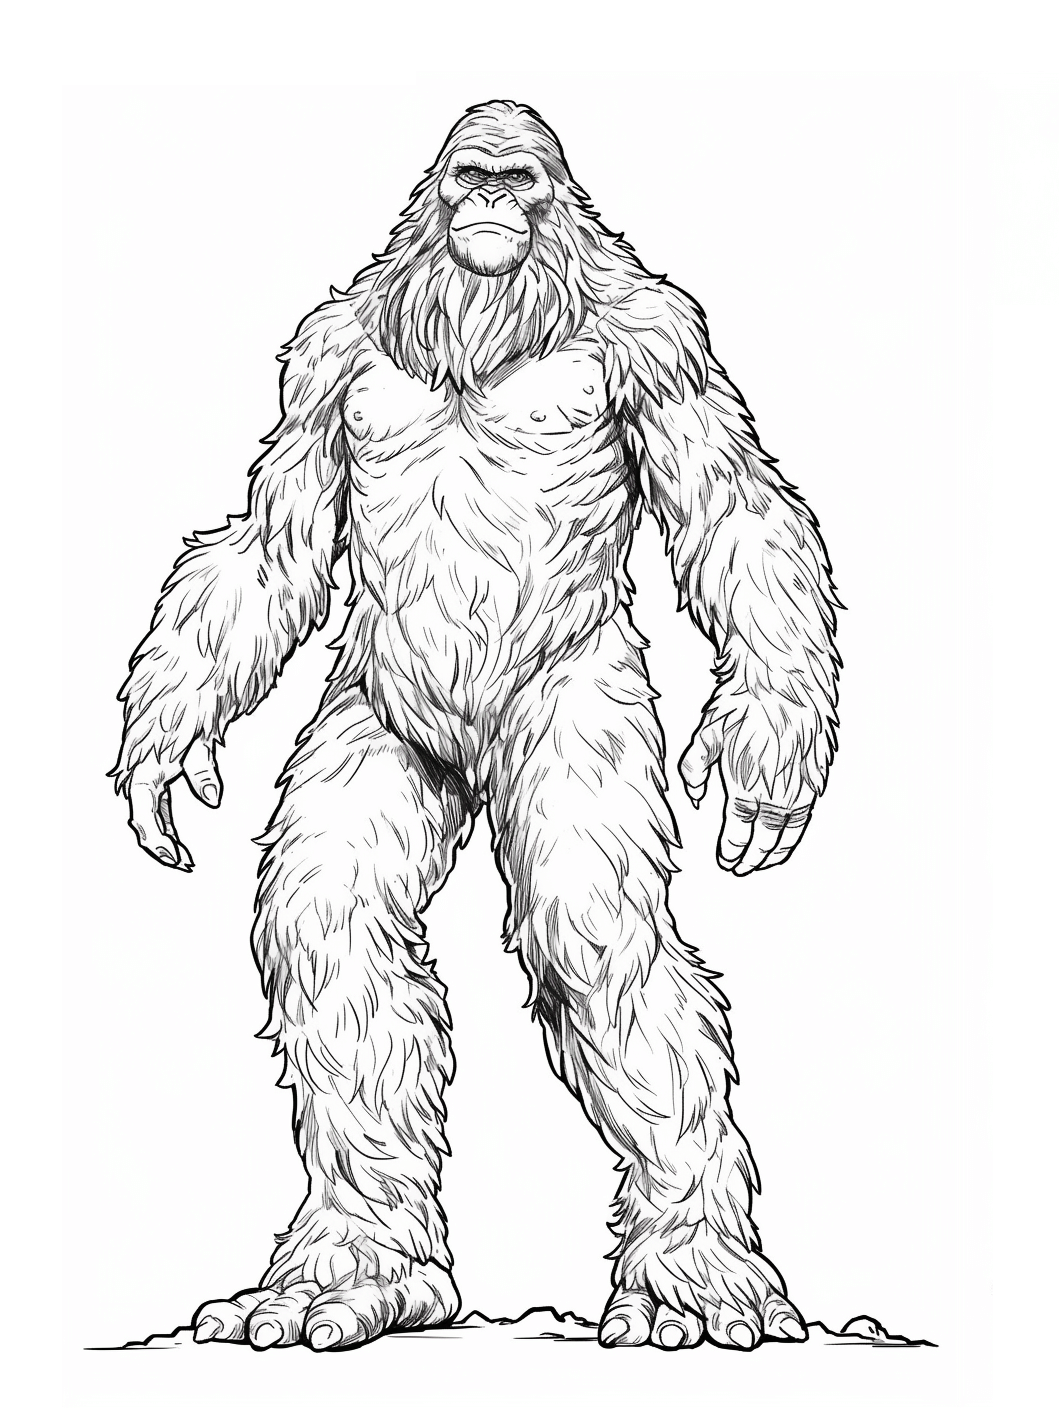 Sasquatch Coloring Page - Bigfoot Coloring Pages - Coloring Pages For ...